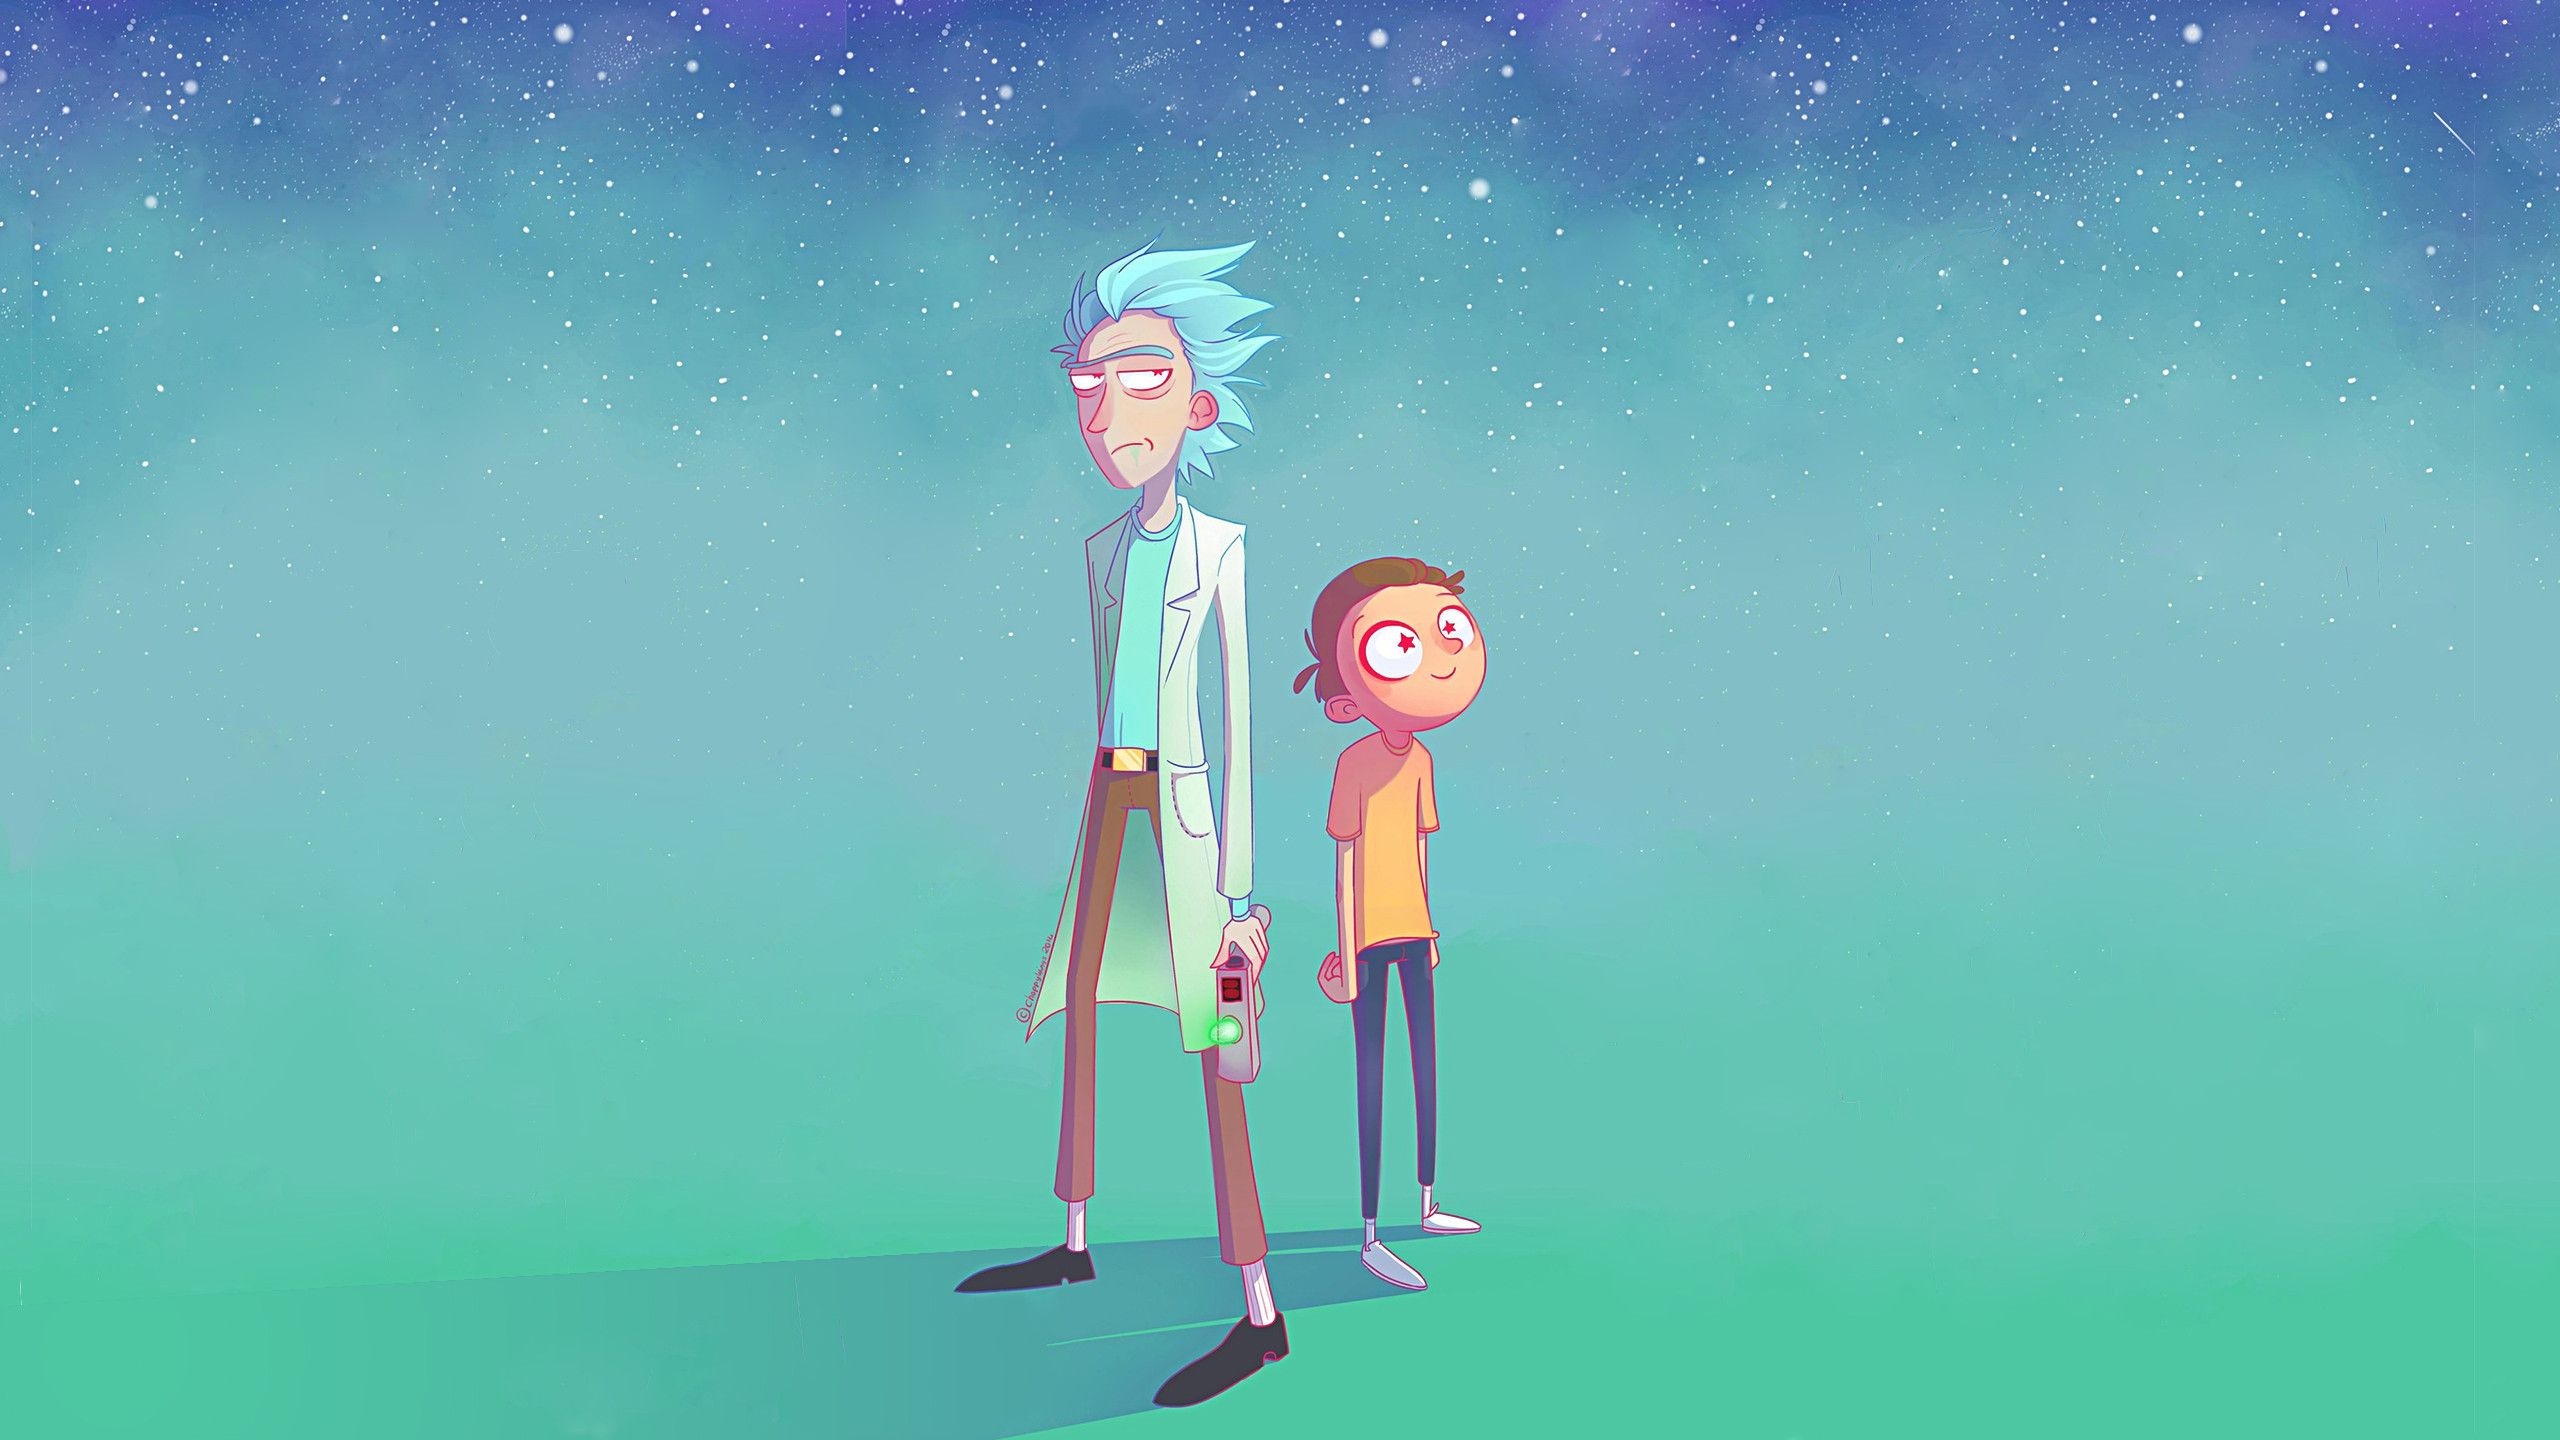 rick and morty, tv show, morty smith, rick sanchez Aesthetic wallpaper